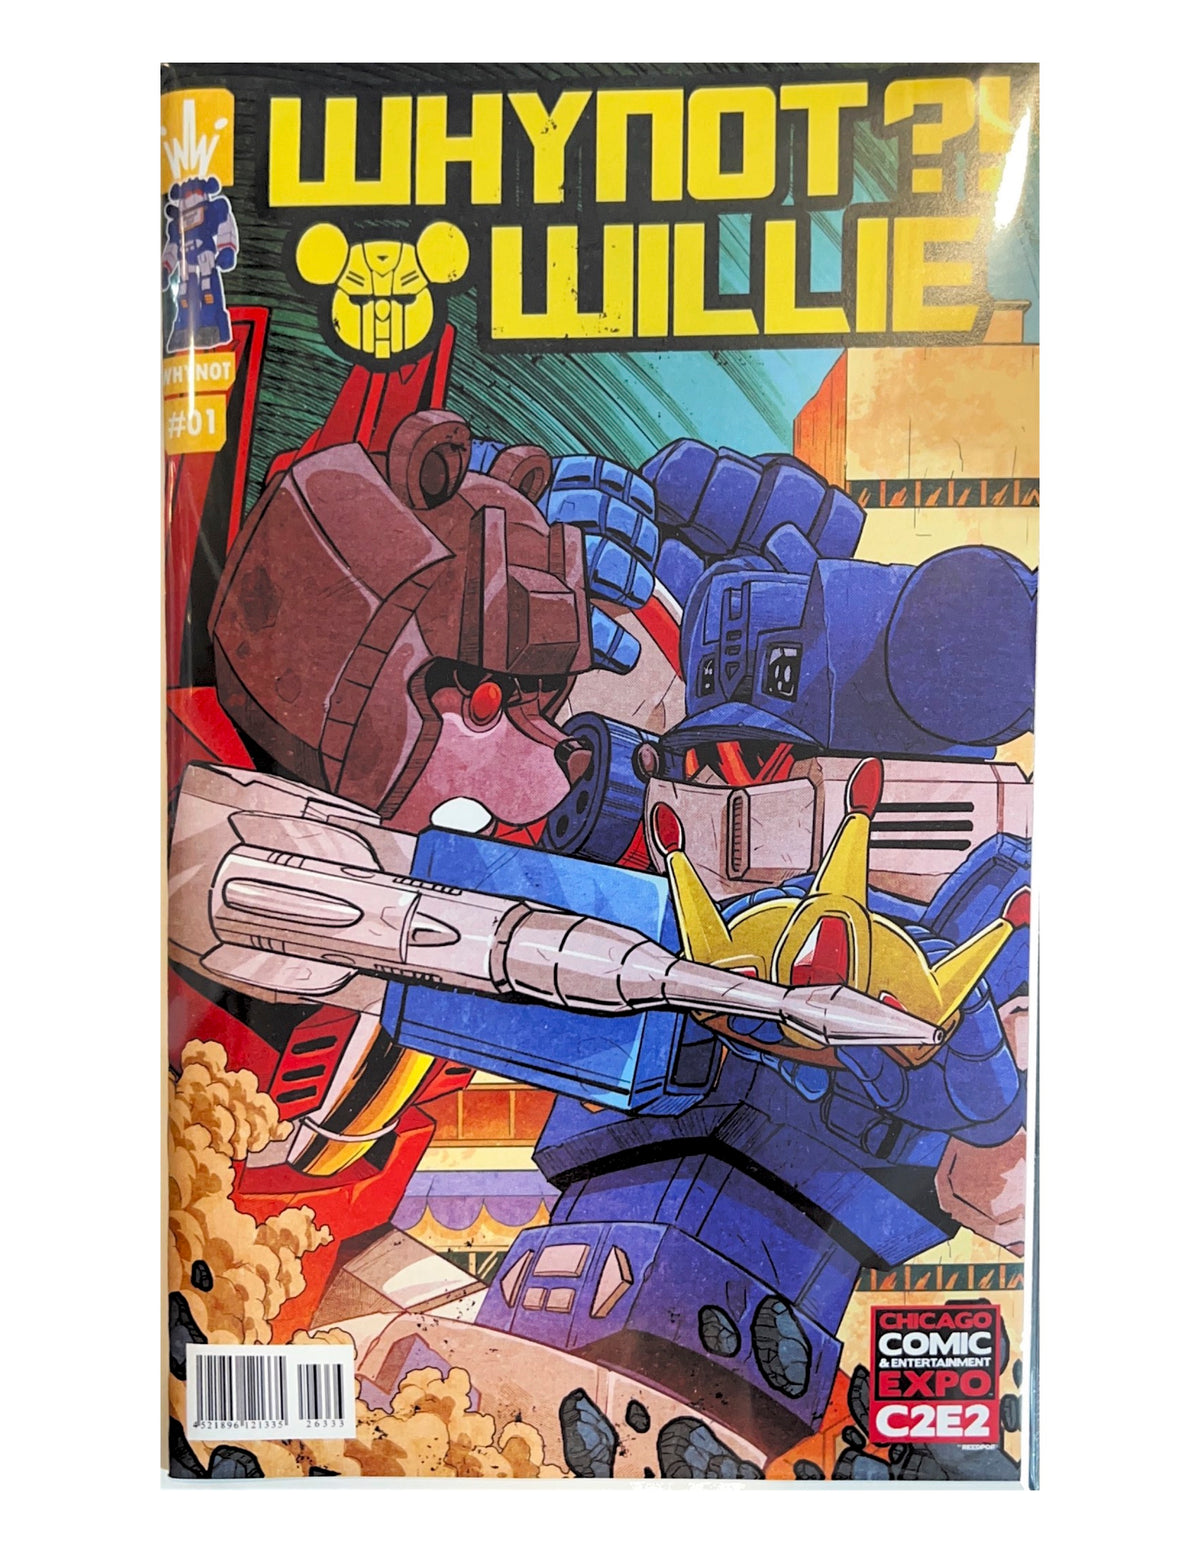 WHYNOT?! WILLIE #1 - C2E2 EXCLUSIVE TRANSFORMERS HOMAGE -  LE 300